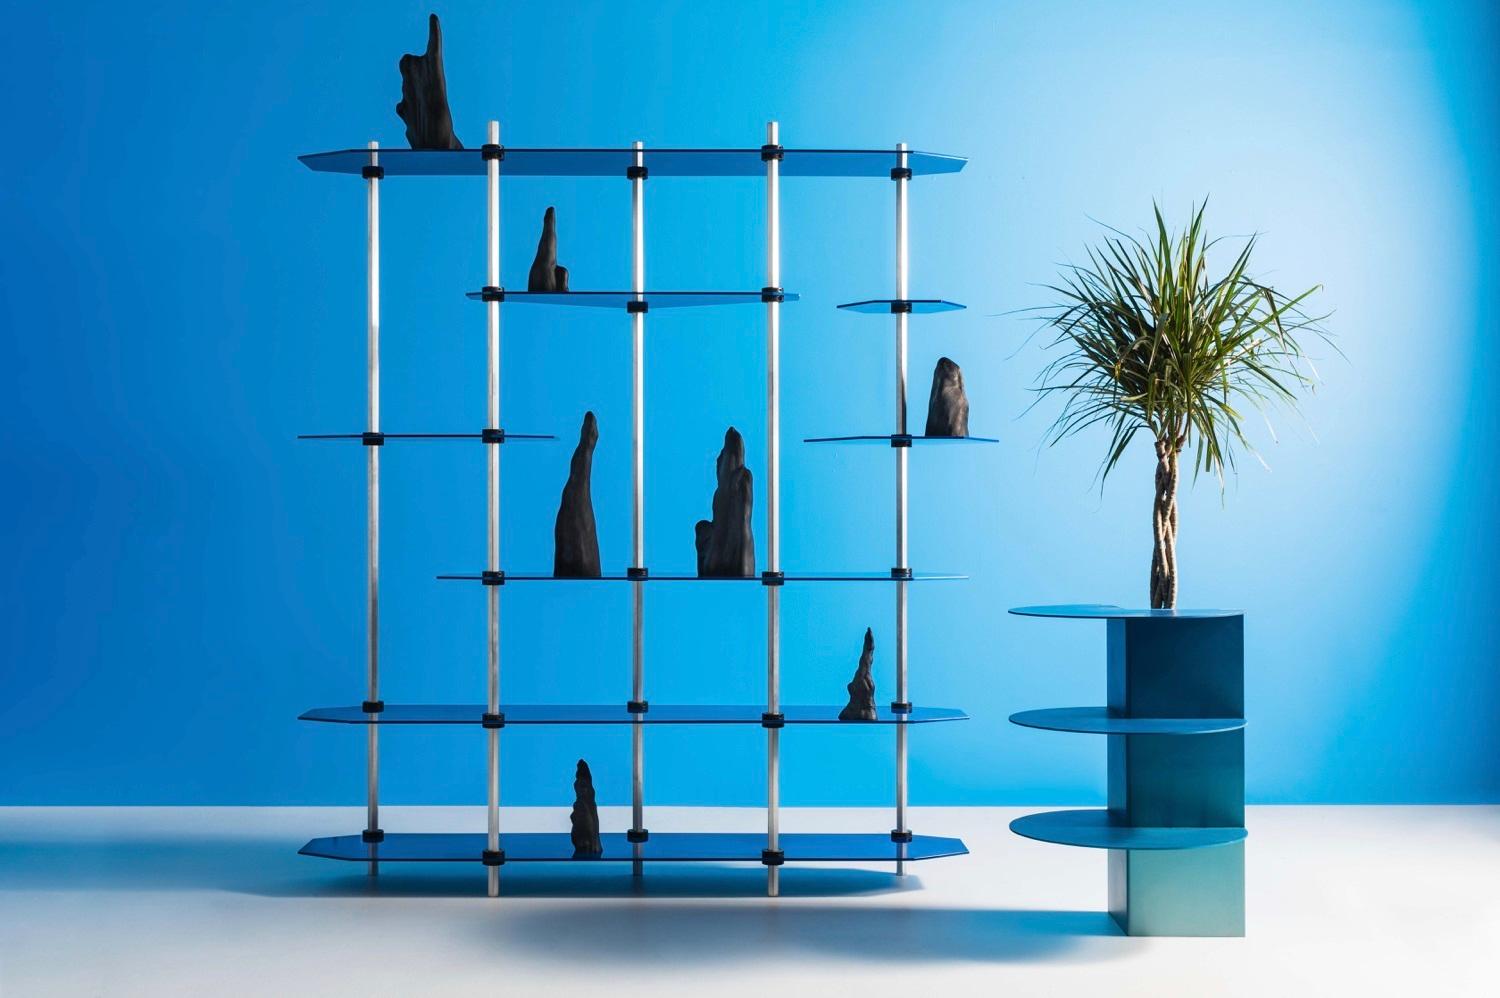 This handmade bookshelf is made of aluminum and resin by Birnam Wood Studio in New York. This contemporary shelving design is heavily influence by geometric shapes and futuristic aesthetic. The open display of the shelving allows one to openly